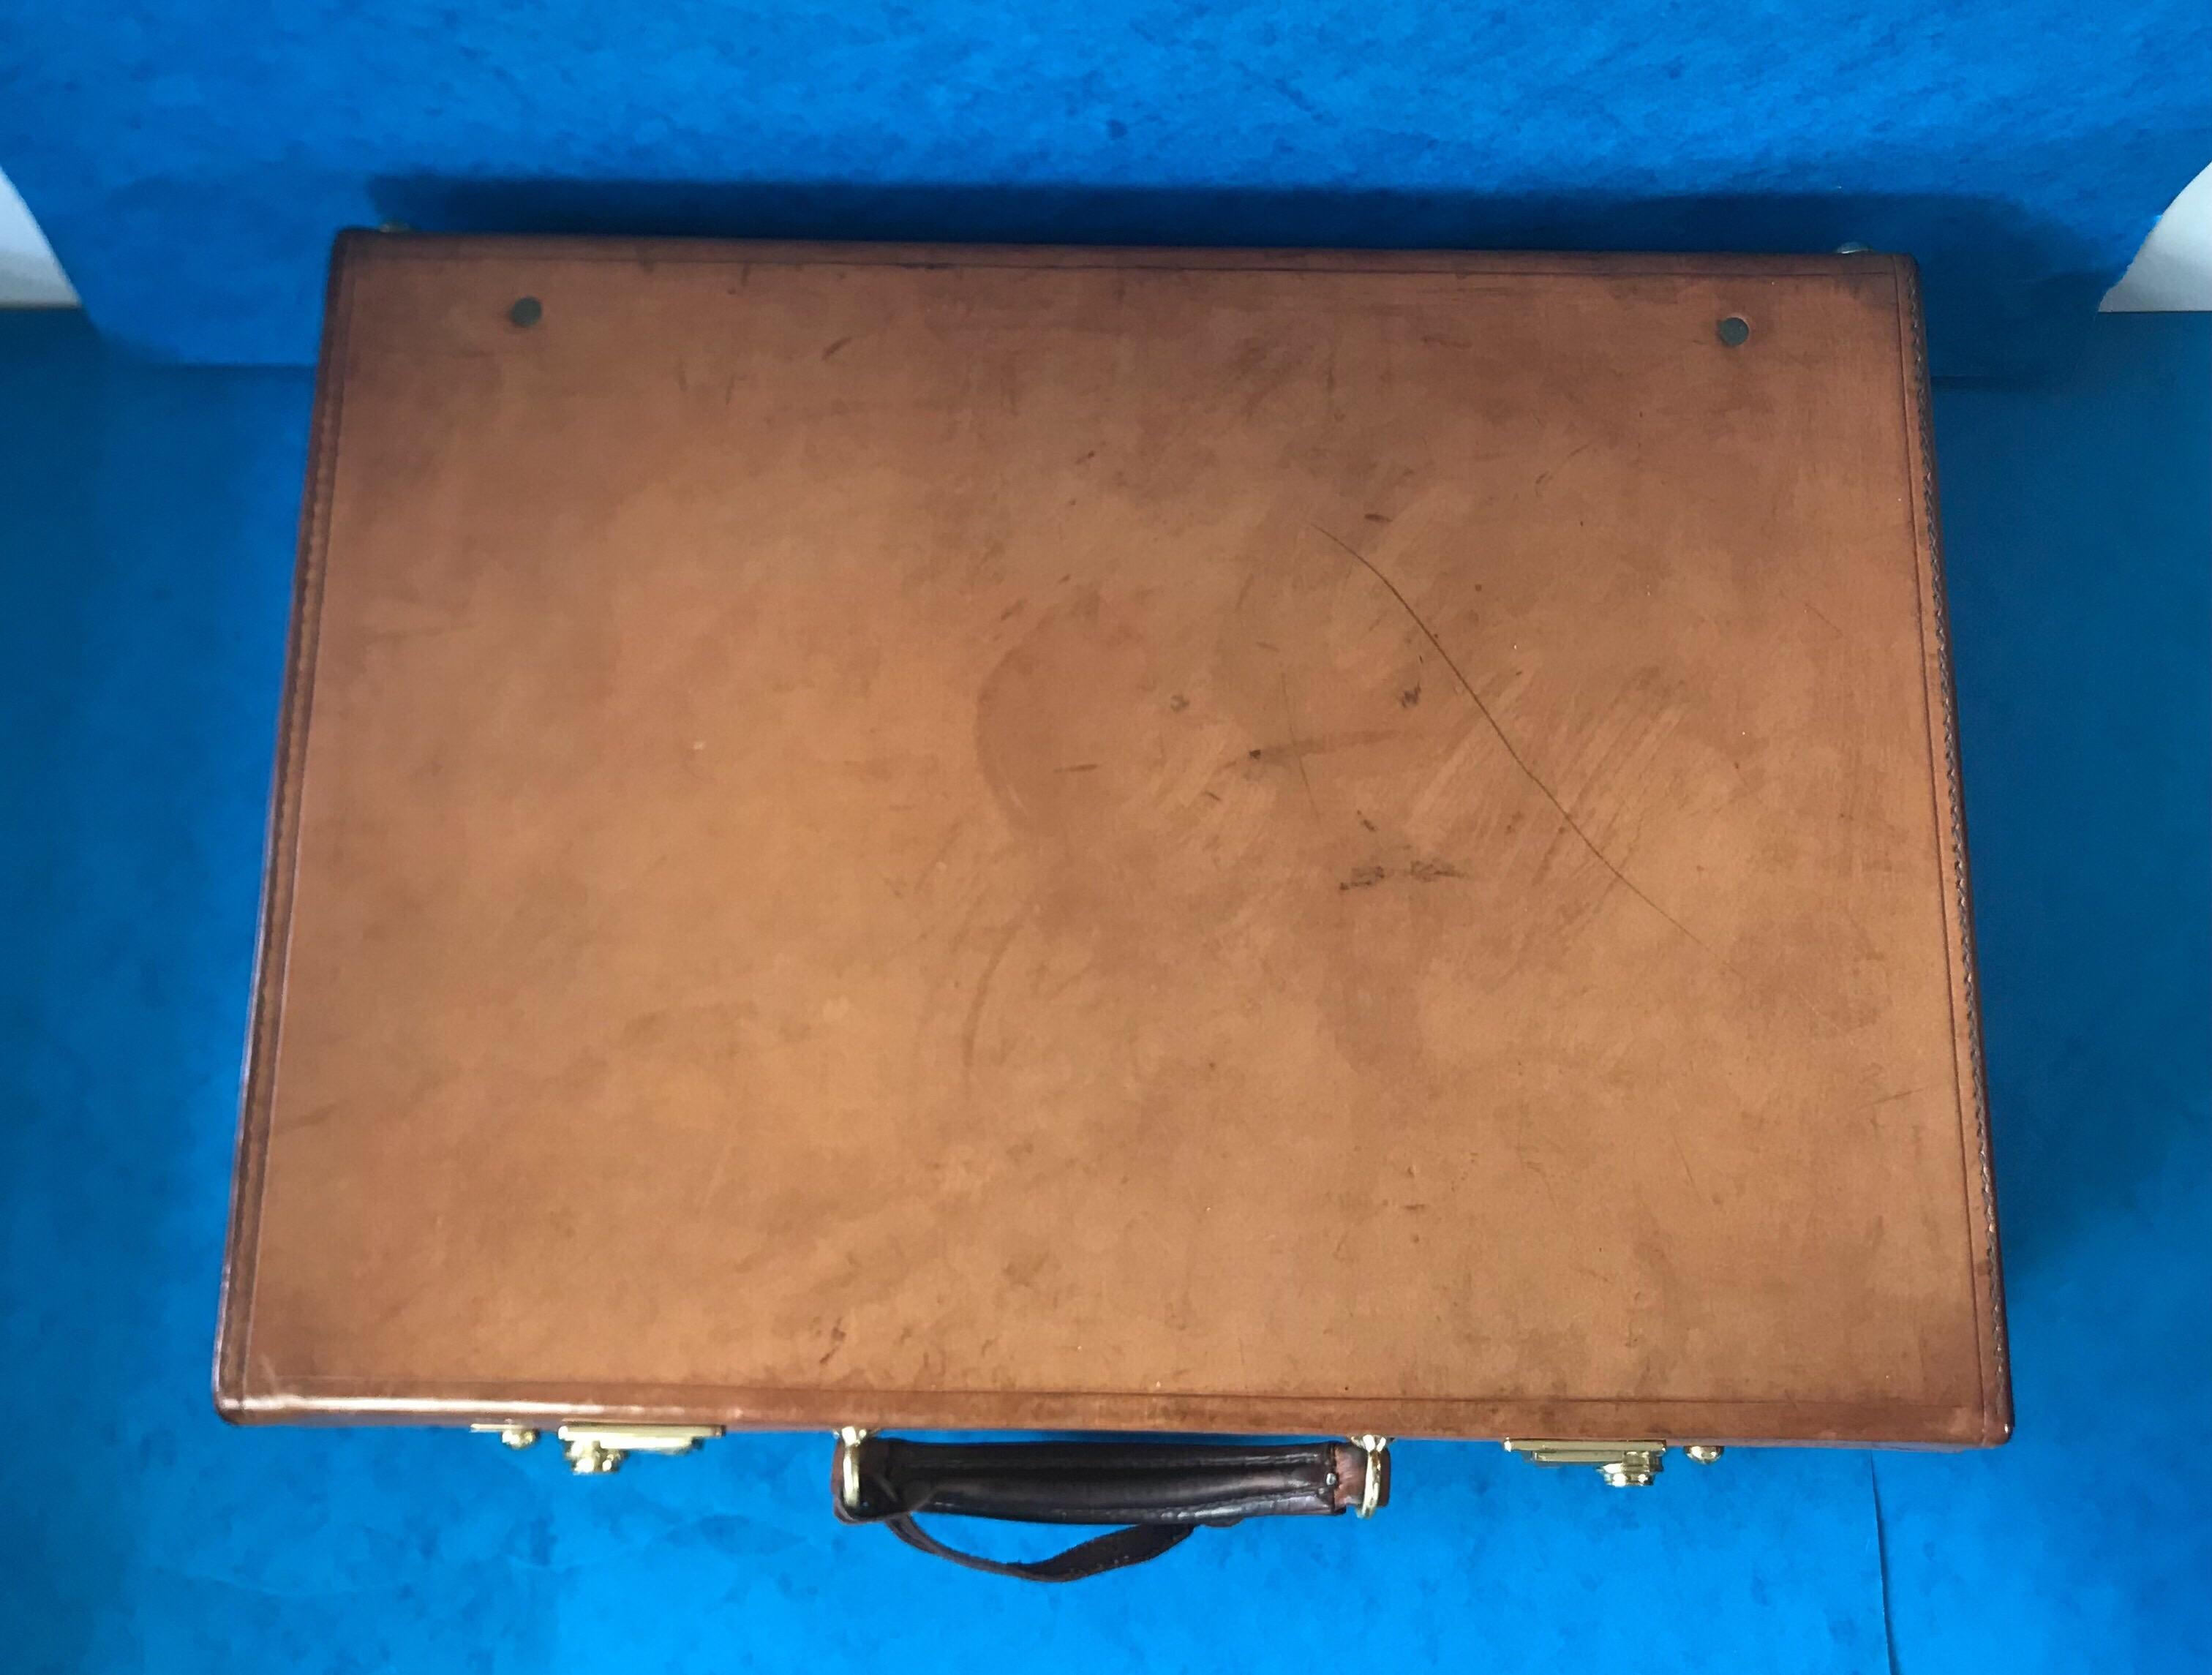 English 1960-1970 Hide Leather Attaché Case by “W & H Gidden”